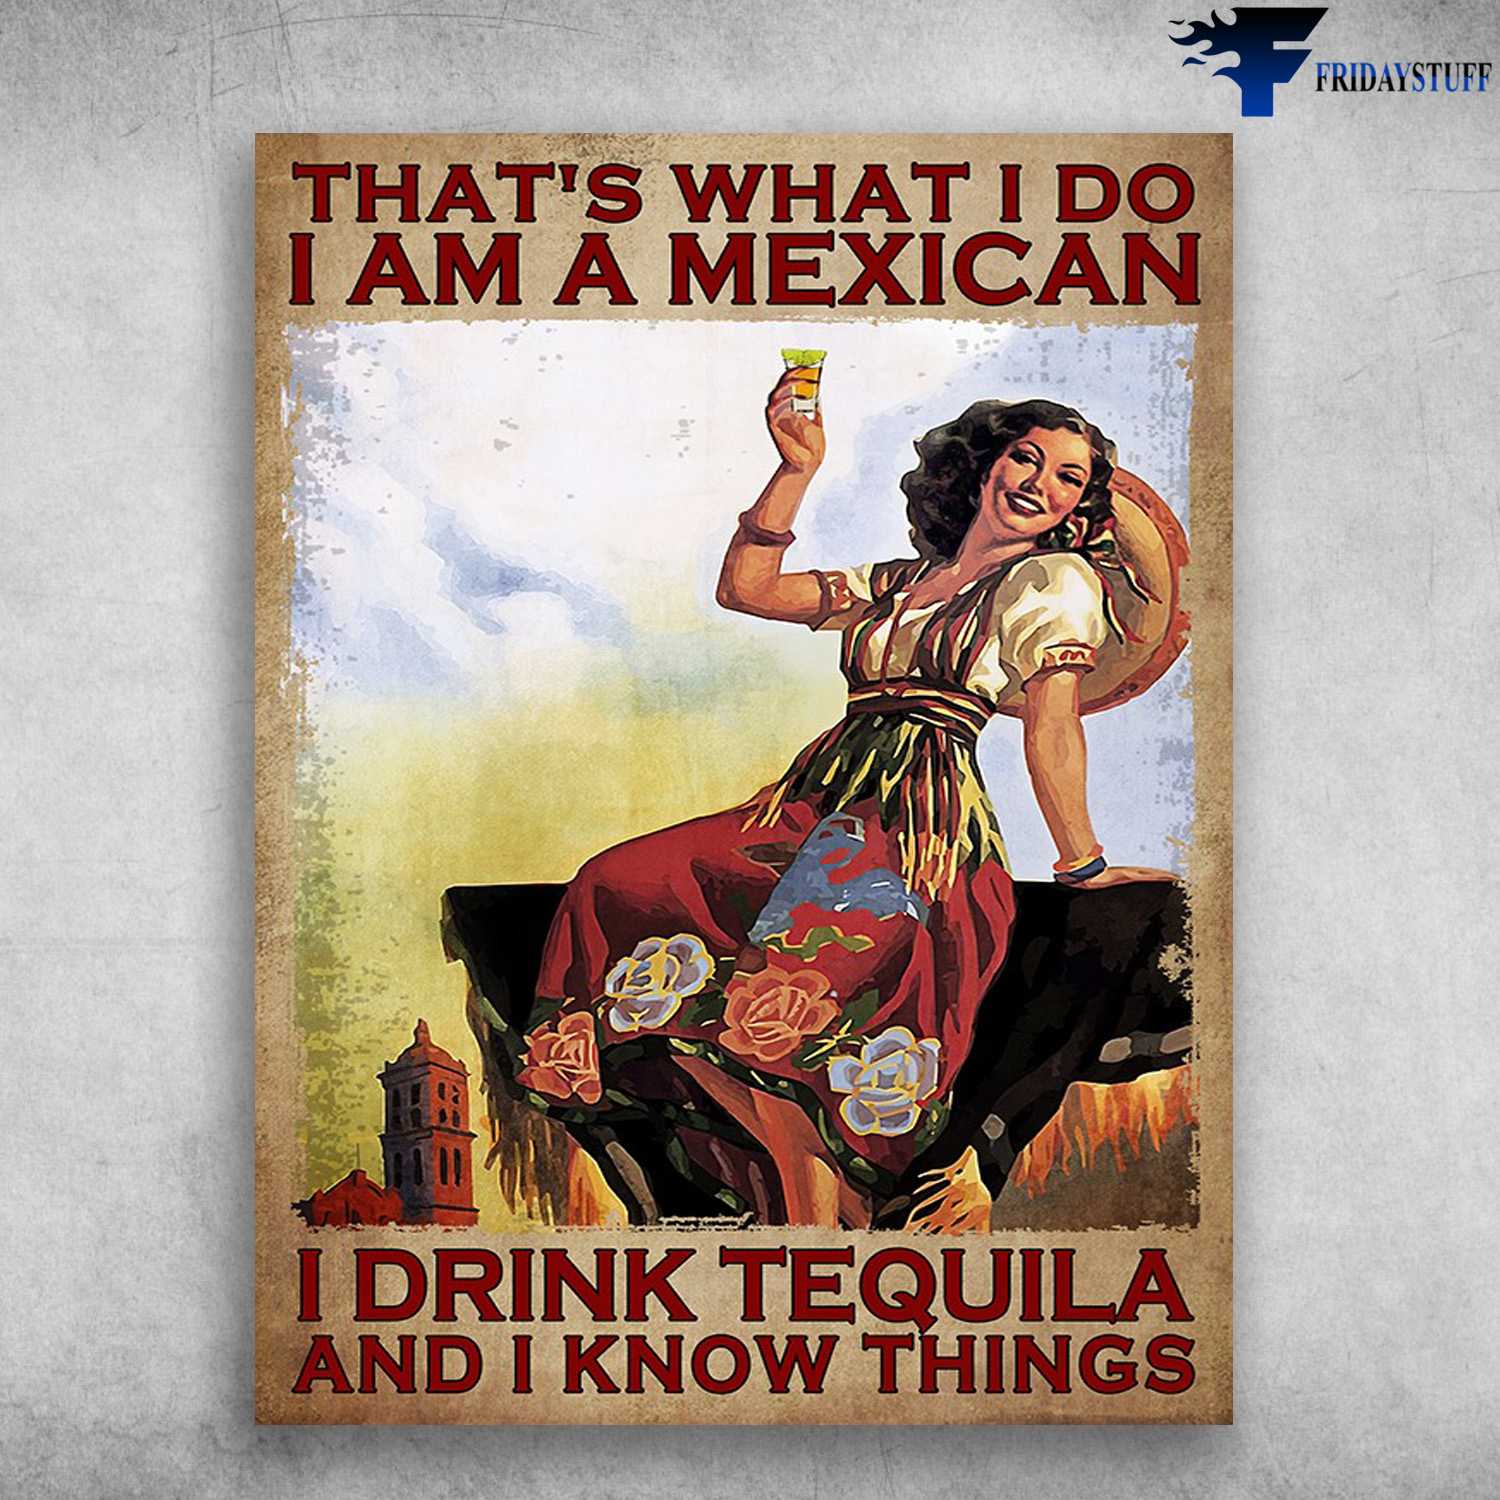 Mexican Girl - That's What I Do, I Am A Mexican, I Drink Tequila, And I Know Things